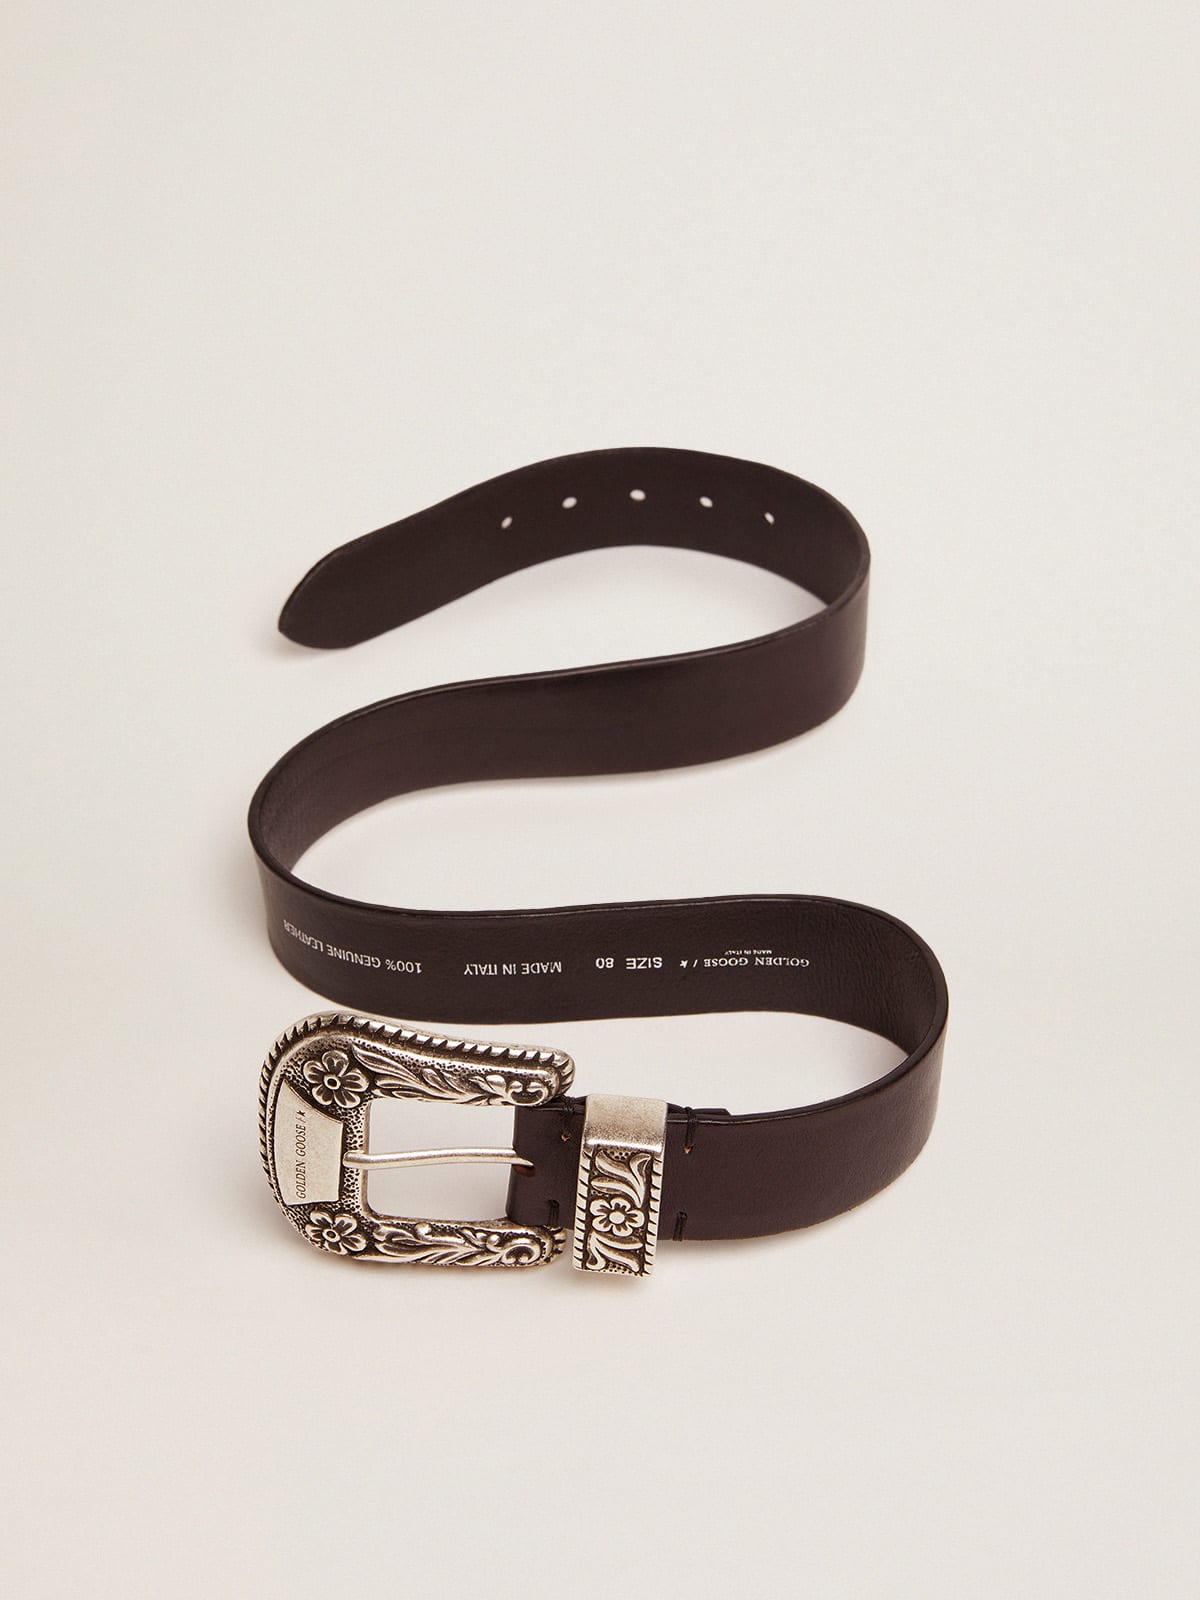 Golden Goose - Lace belt in black leather with silver color decorated buckle in 